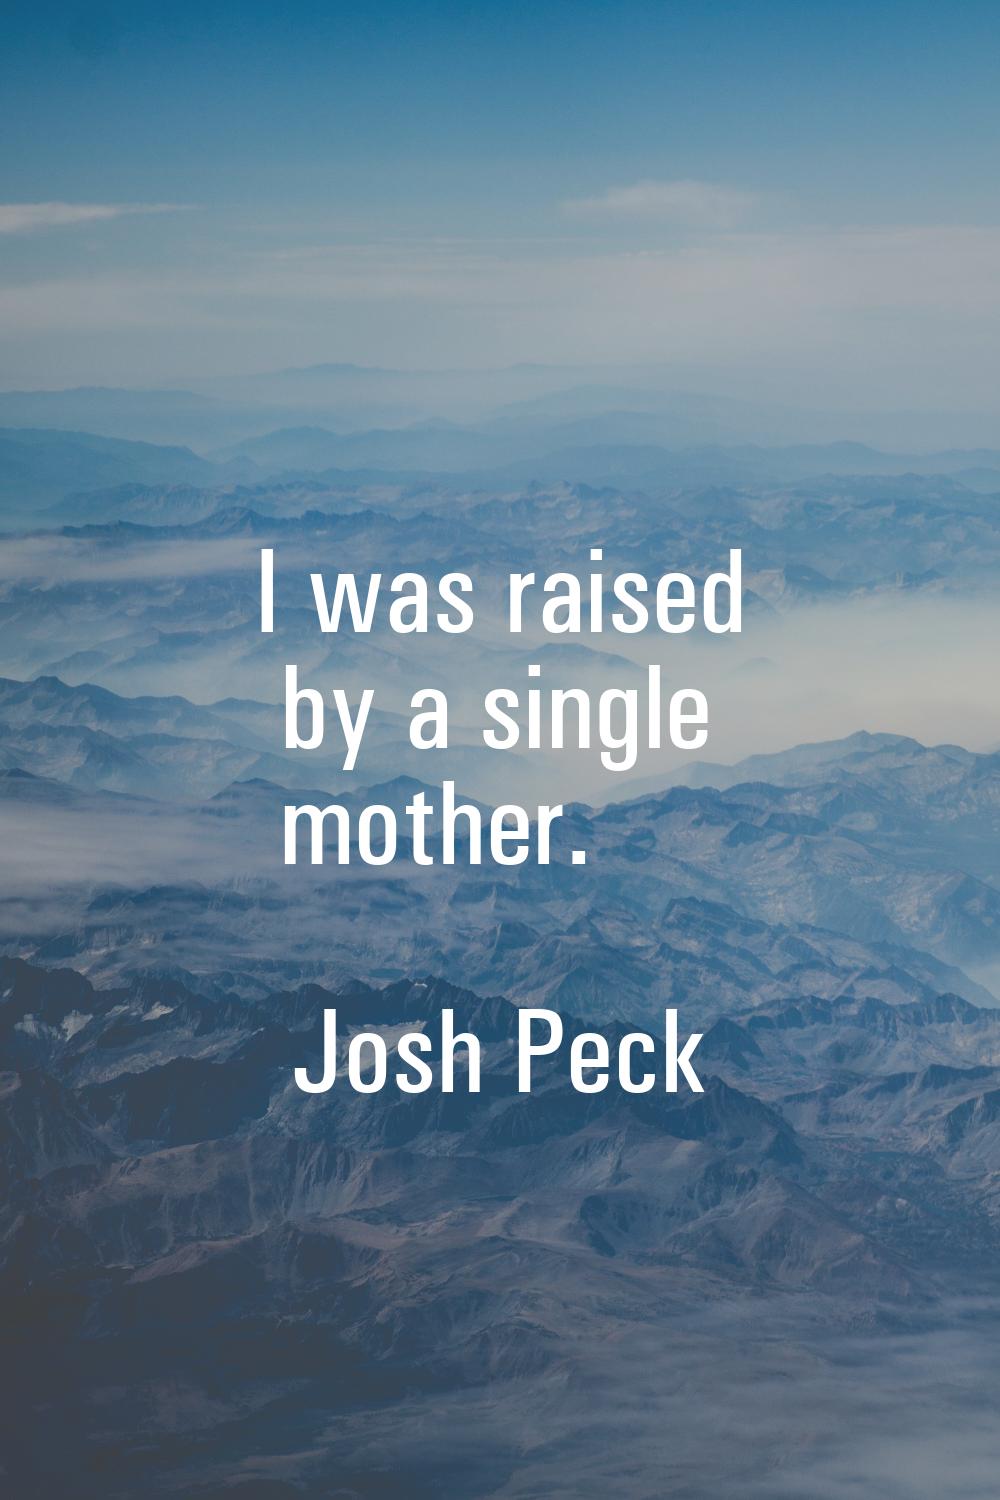 I was raised by a single mother.